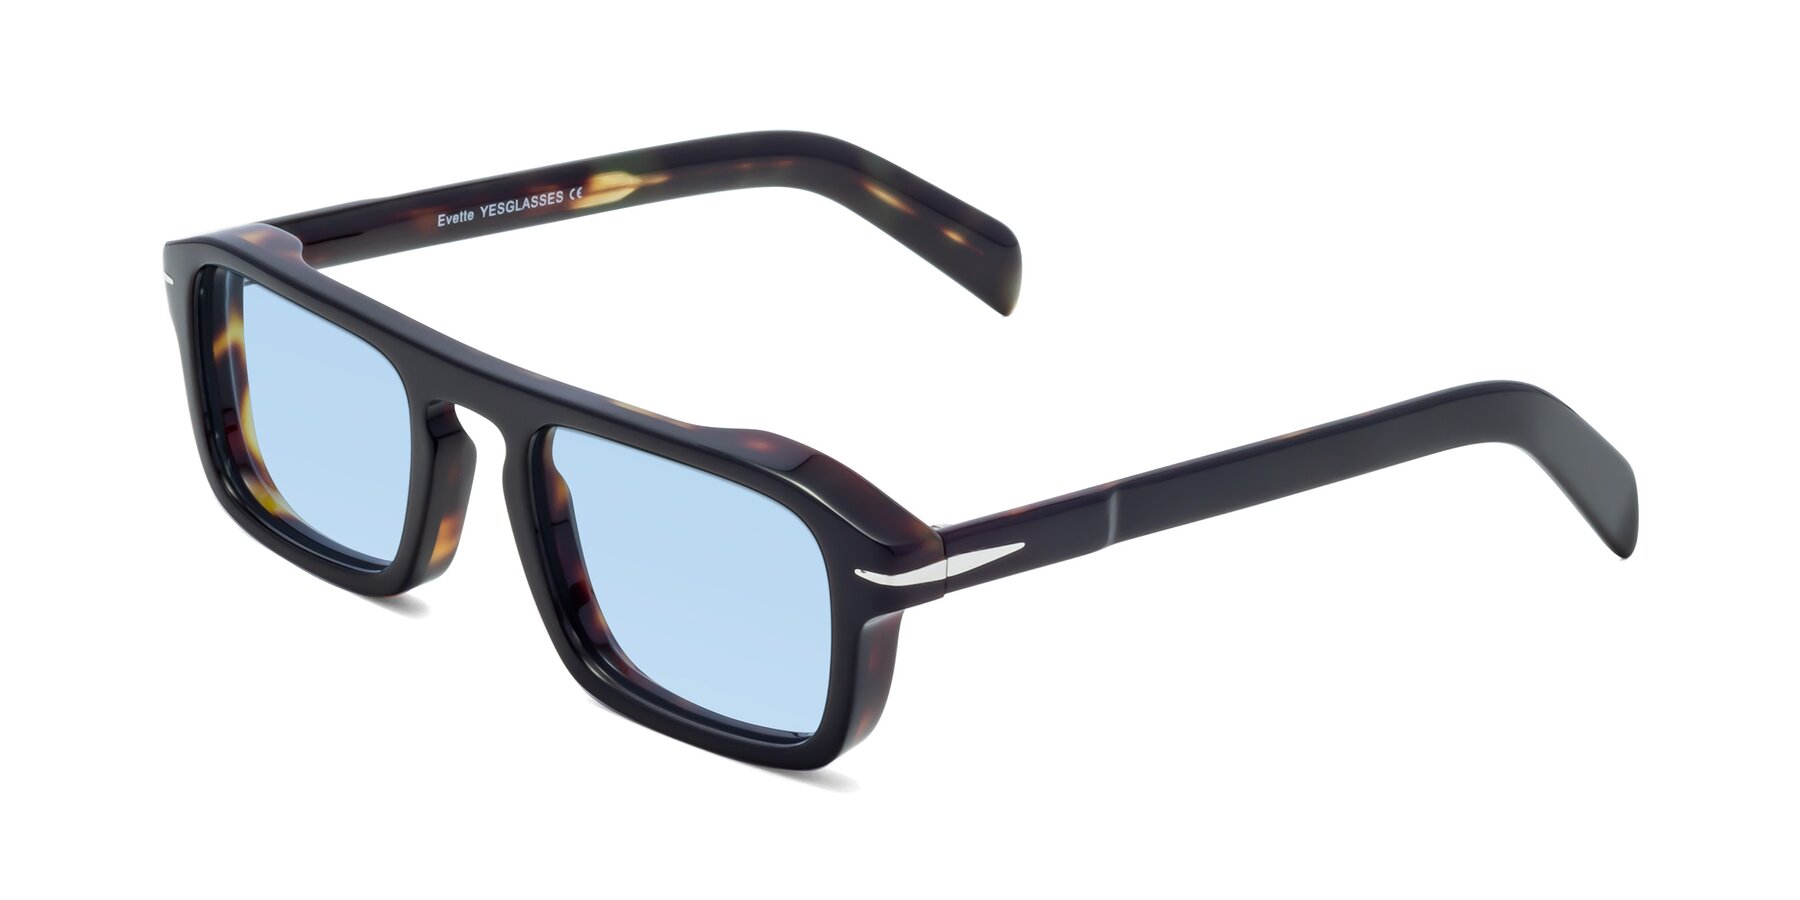 Angle of Evette in Black-Tortoise with Light Blue Tinted Lenses